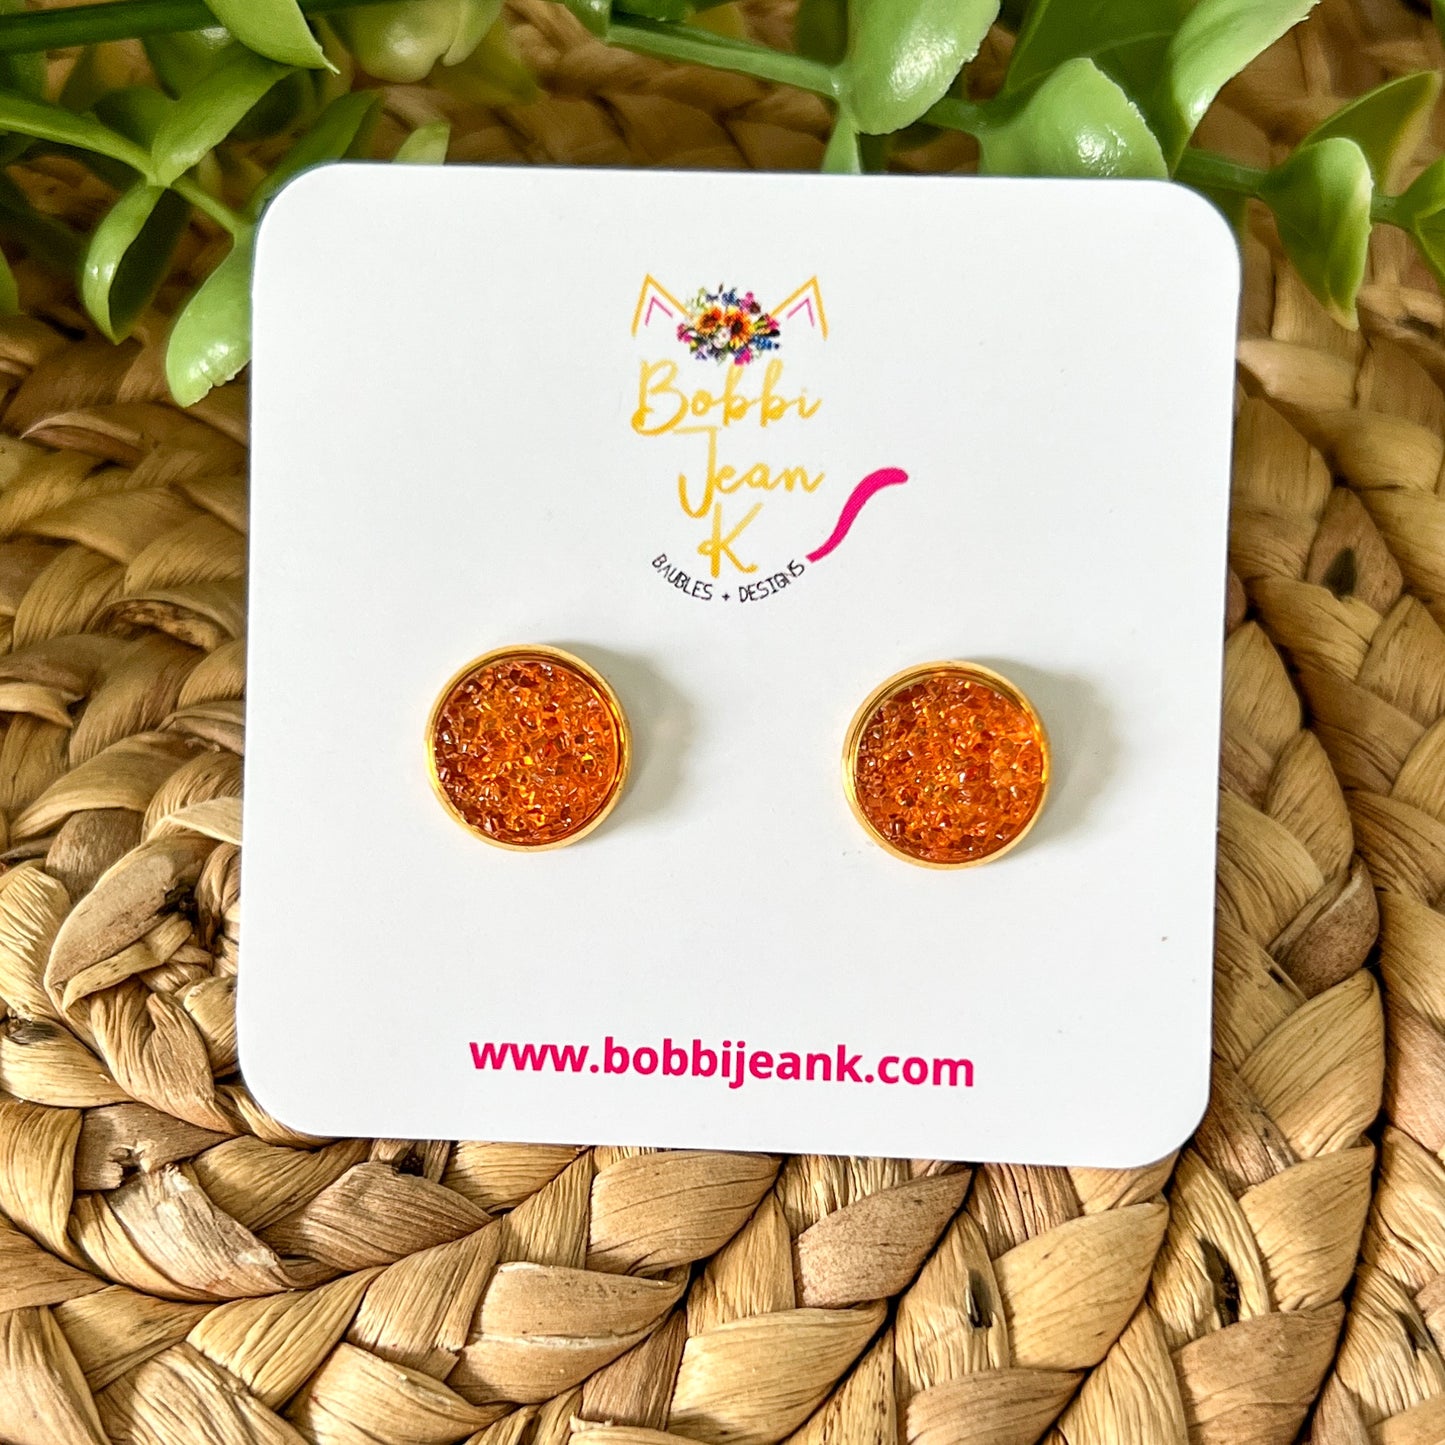 Orange "Ice" Faux Druzy Studs 12mm: Choose Silver or Gold Settings